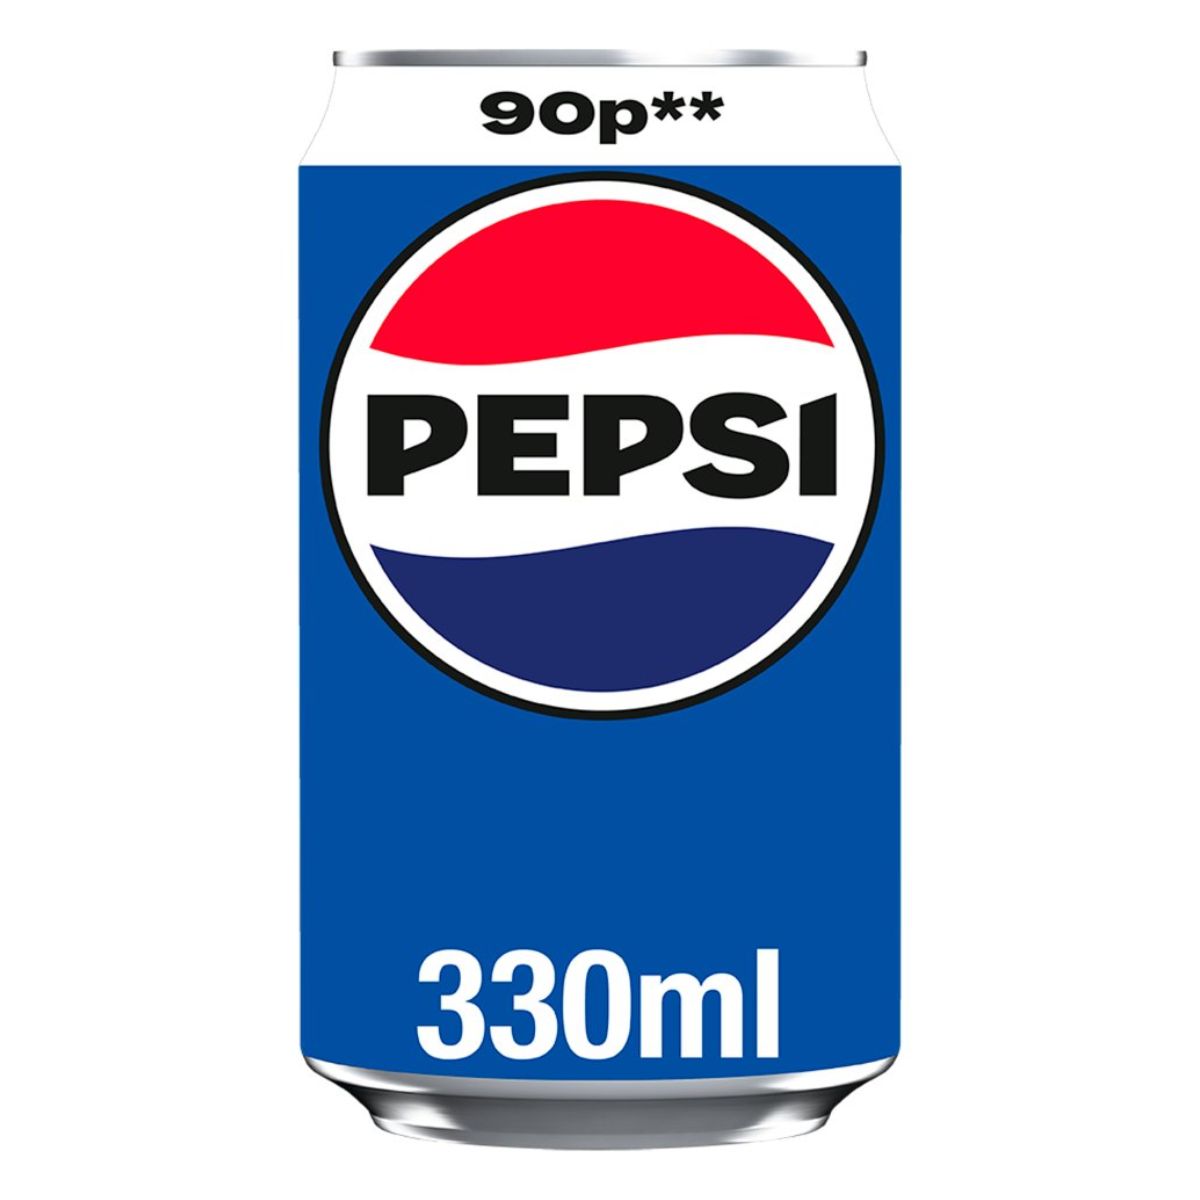 Pepsi 330 ml can on a white background.